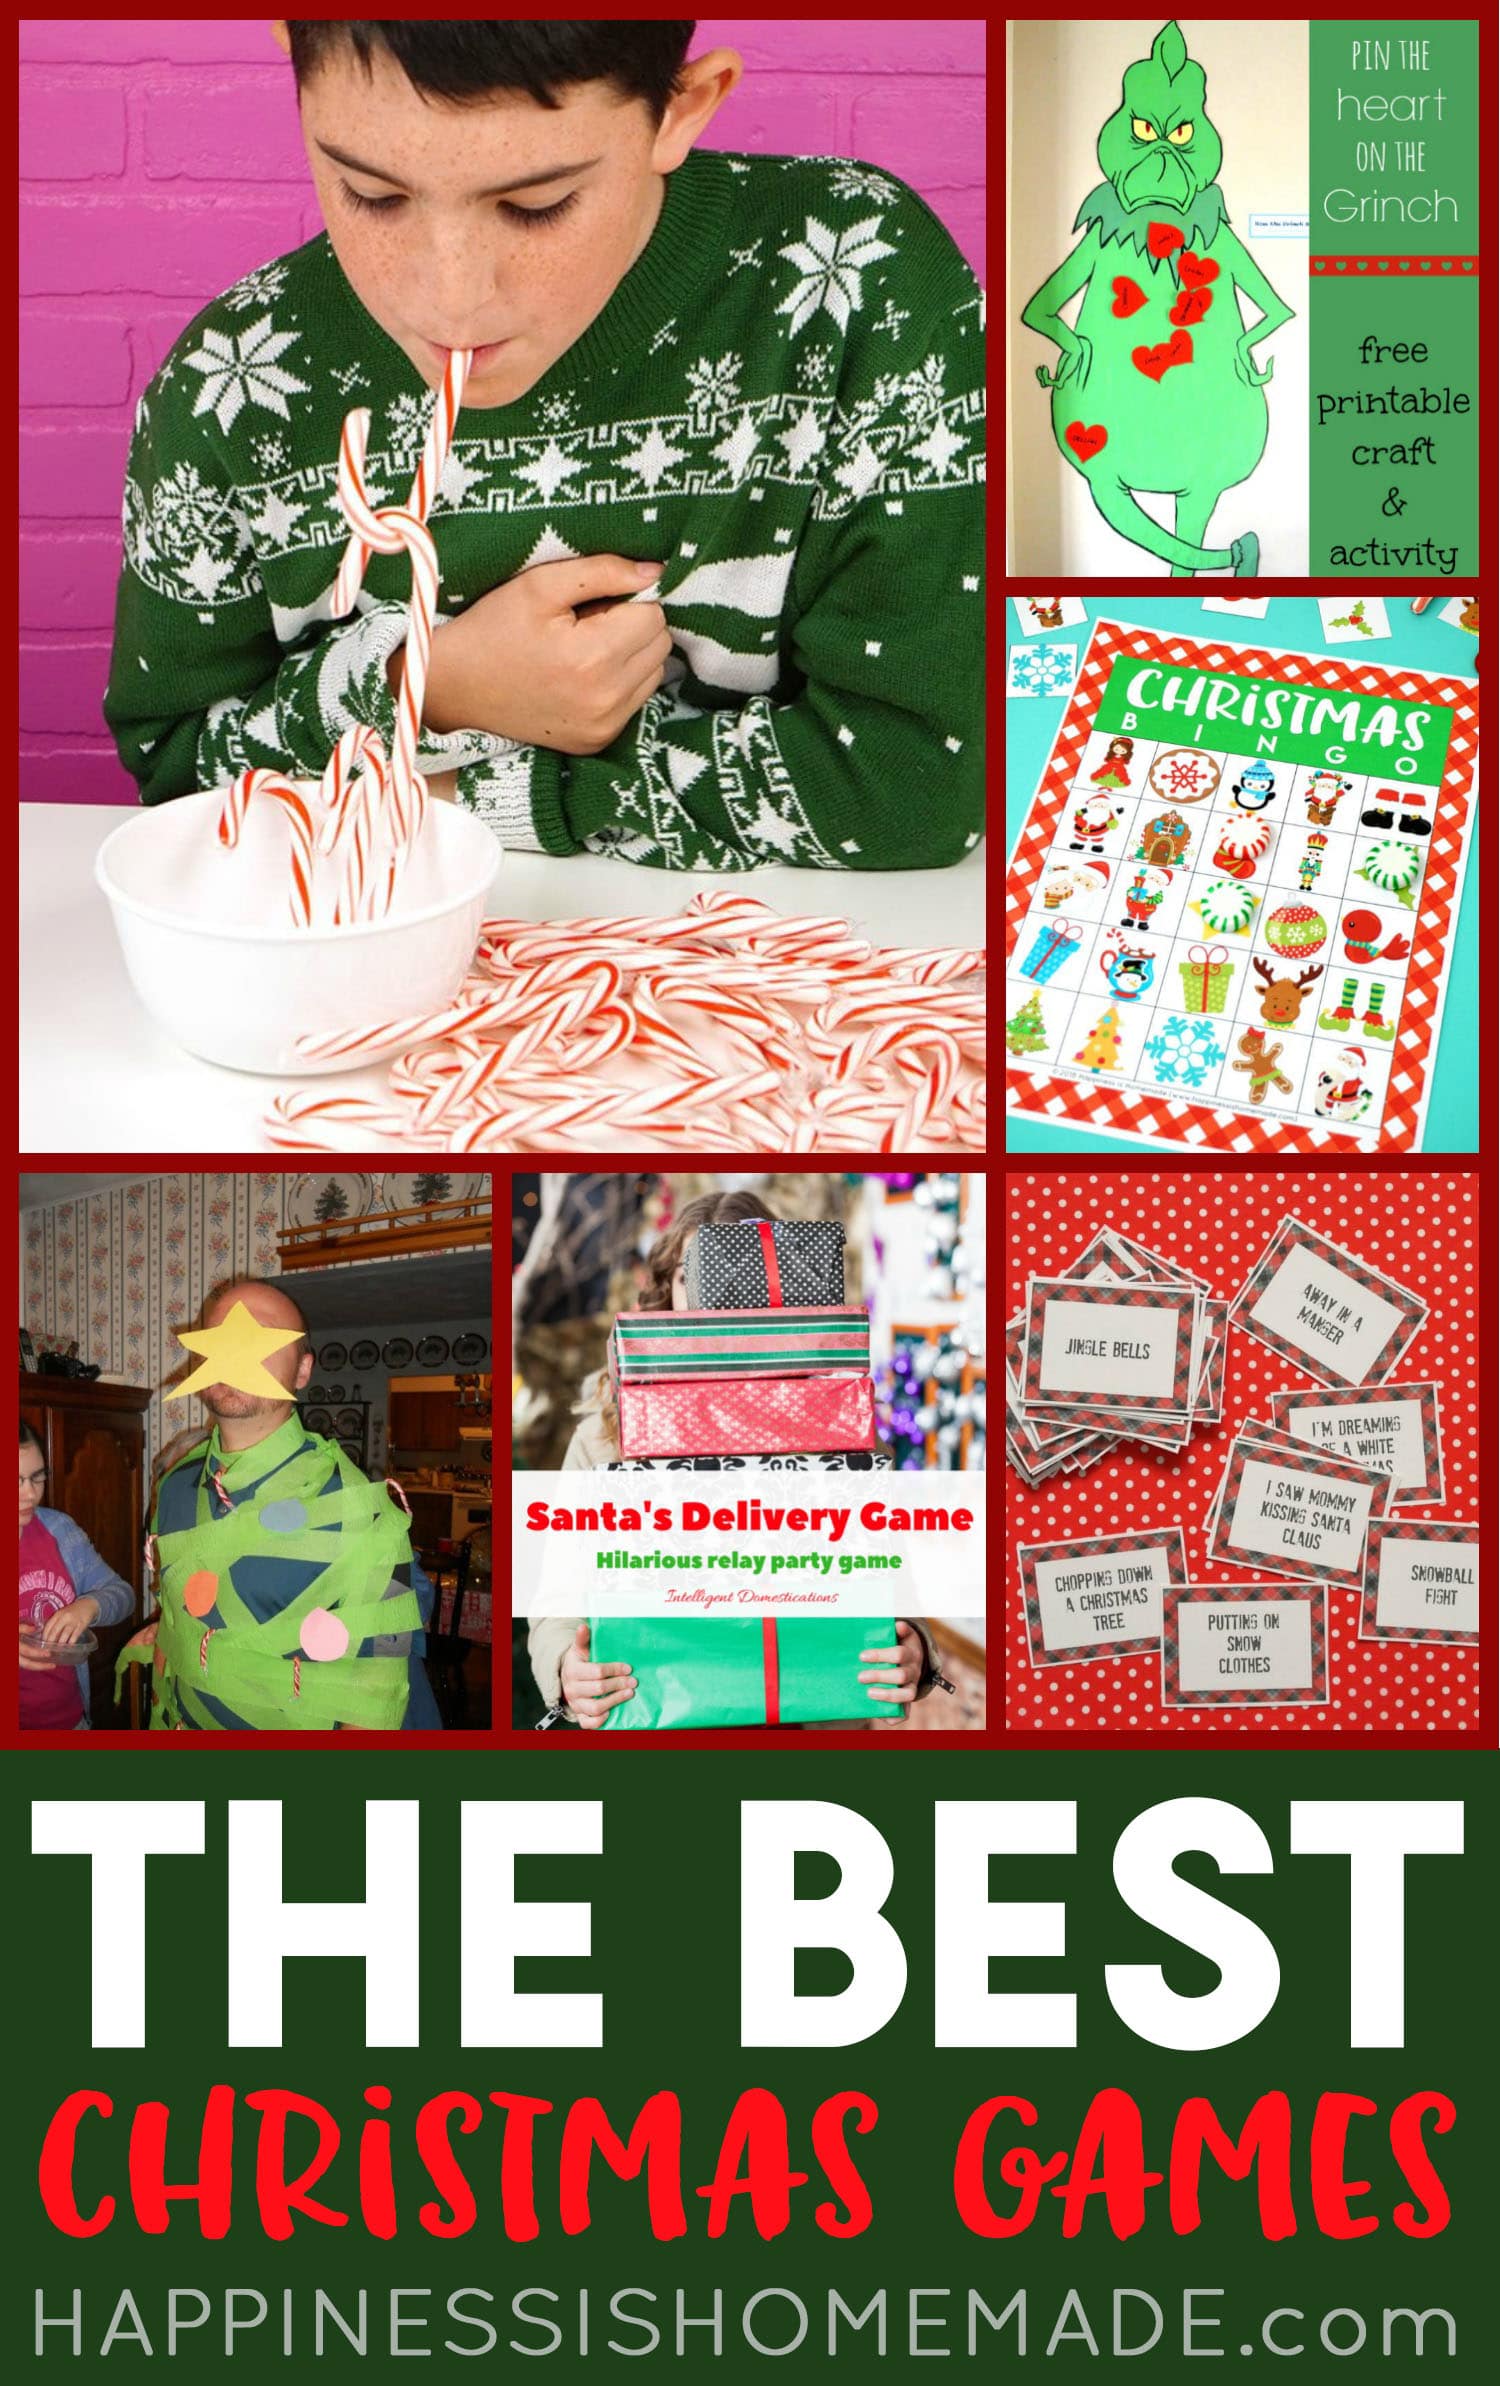 The Best Christmas Games for Kids collage